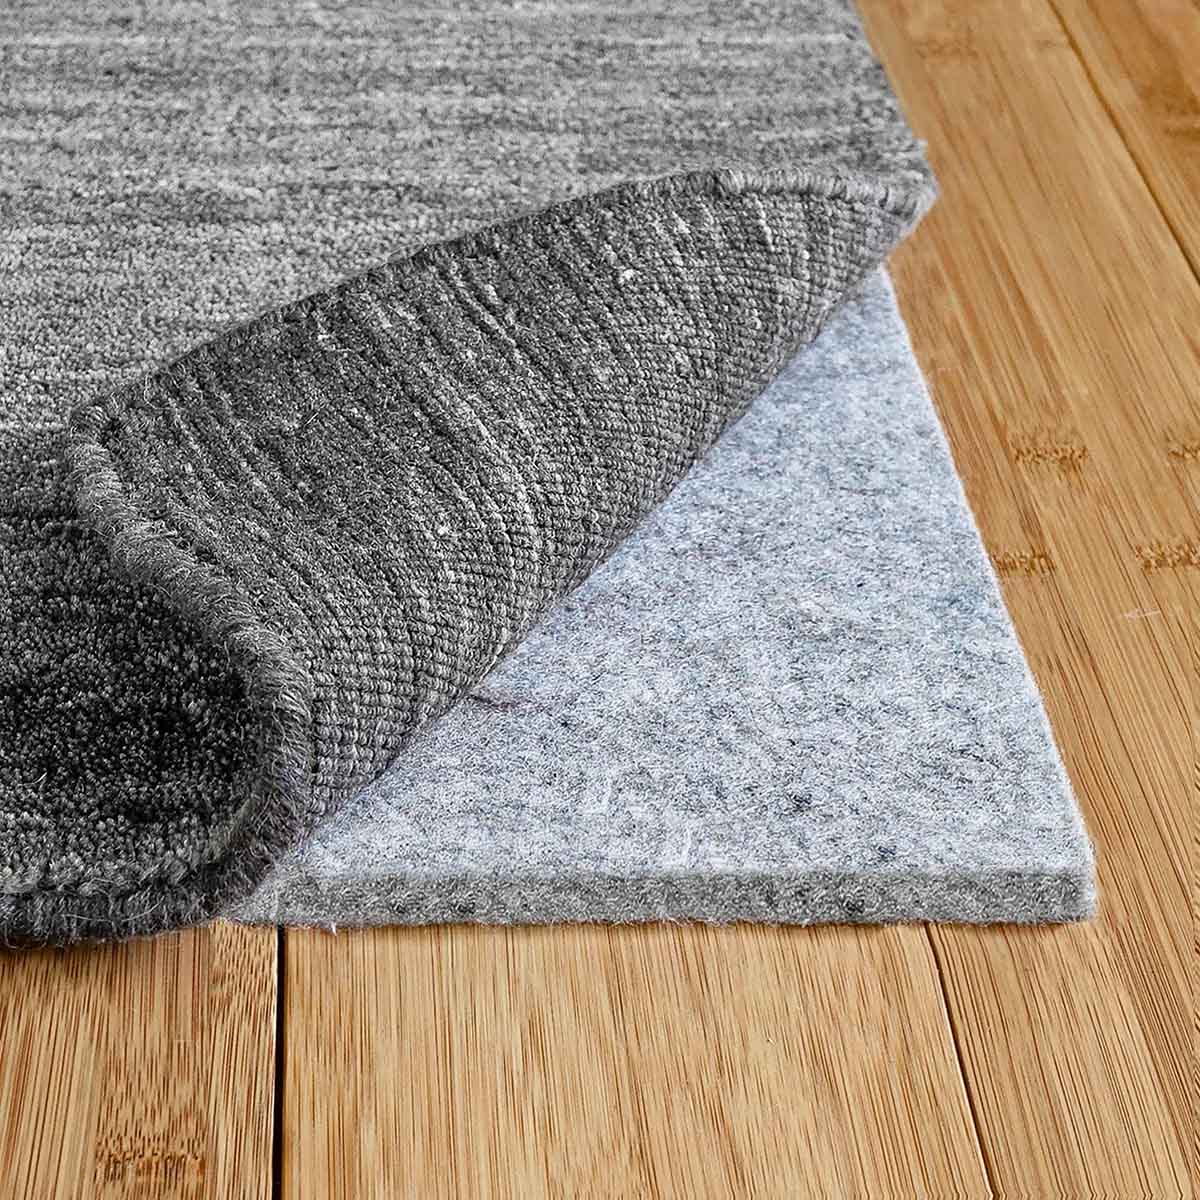 how-thick-should-carpet-padding-be-1701672860